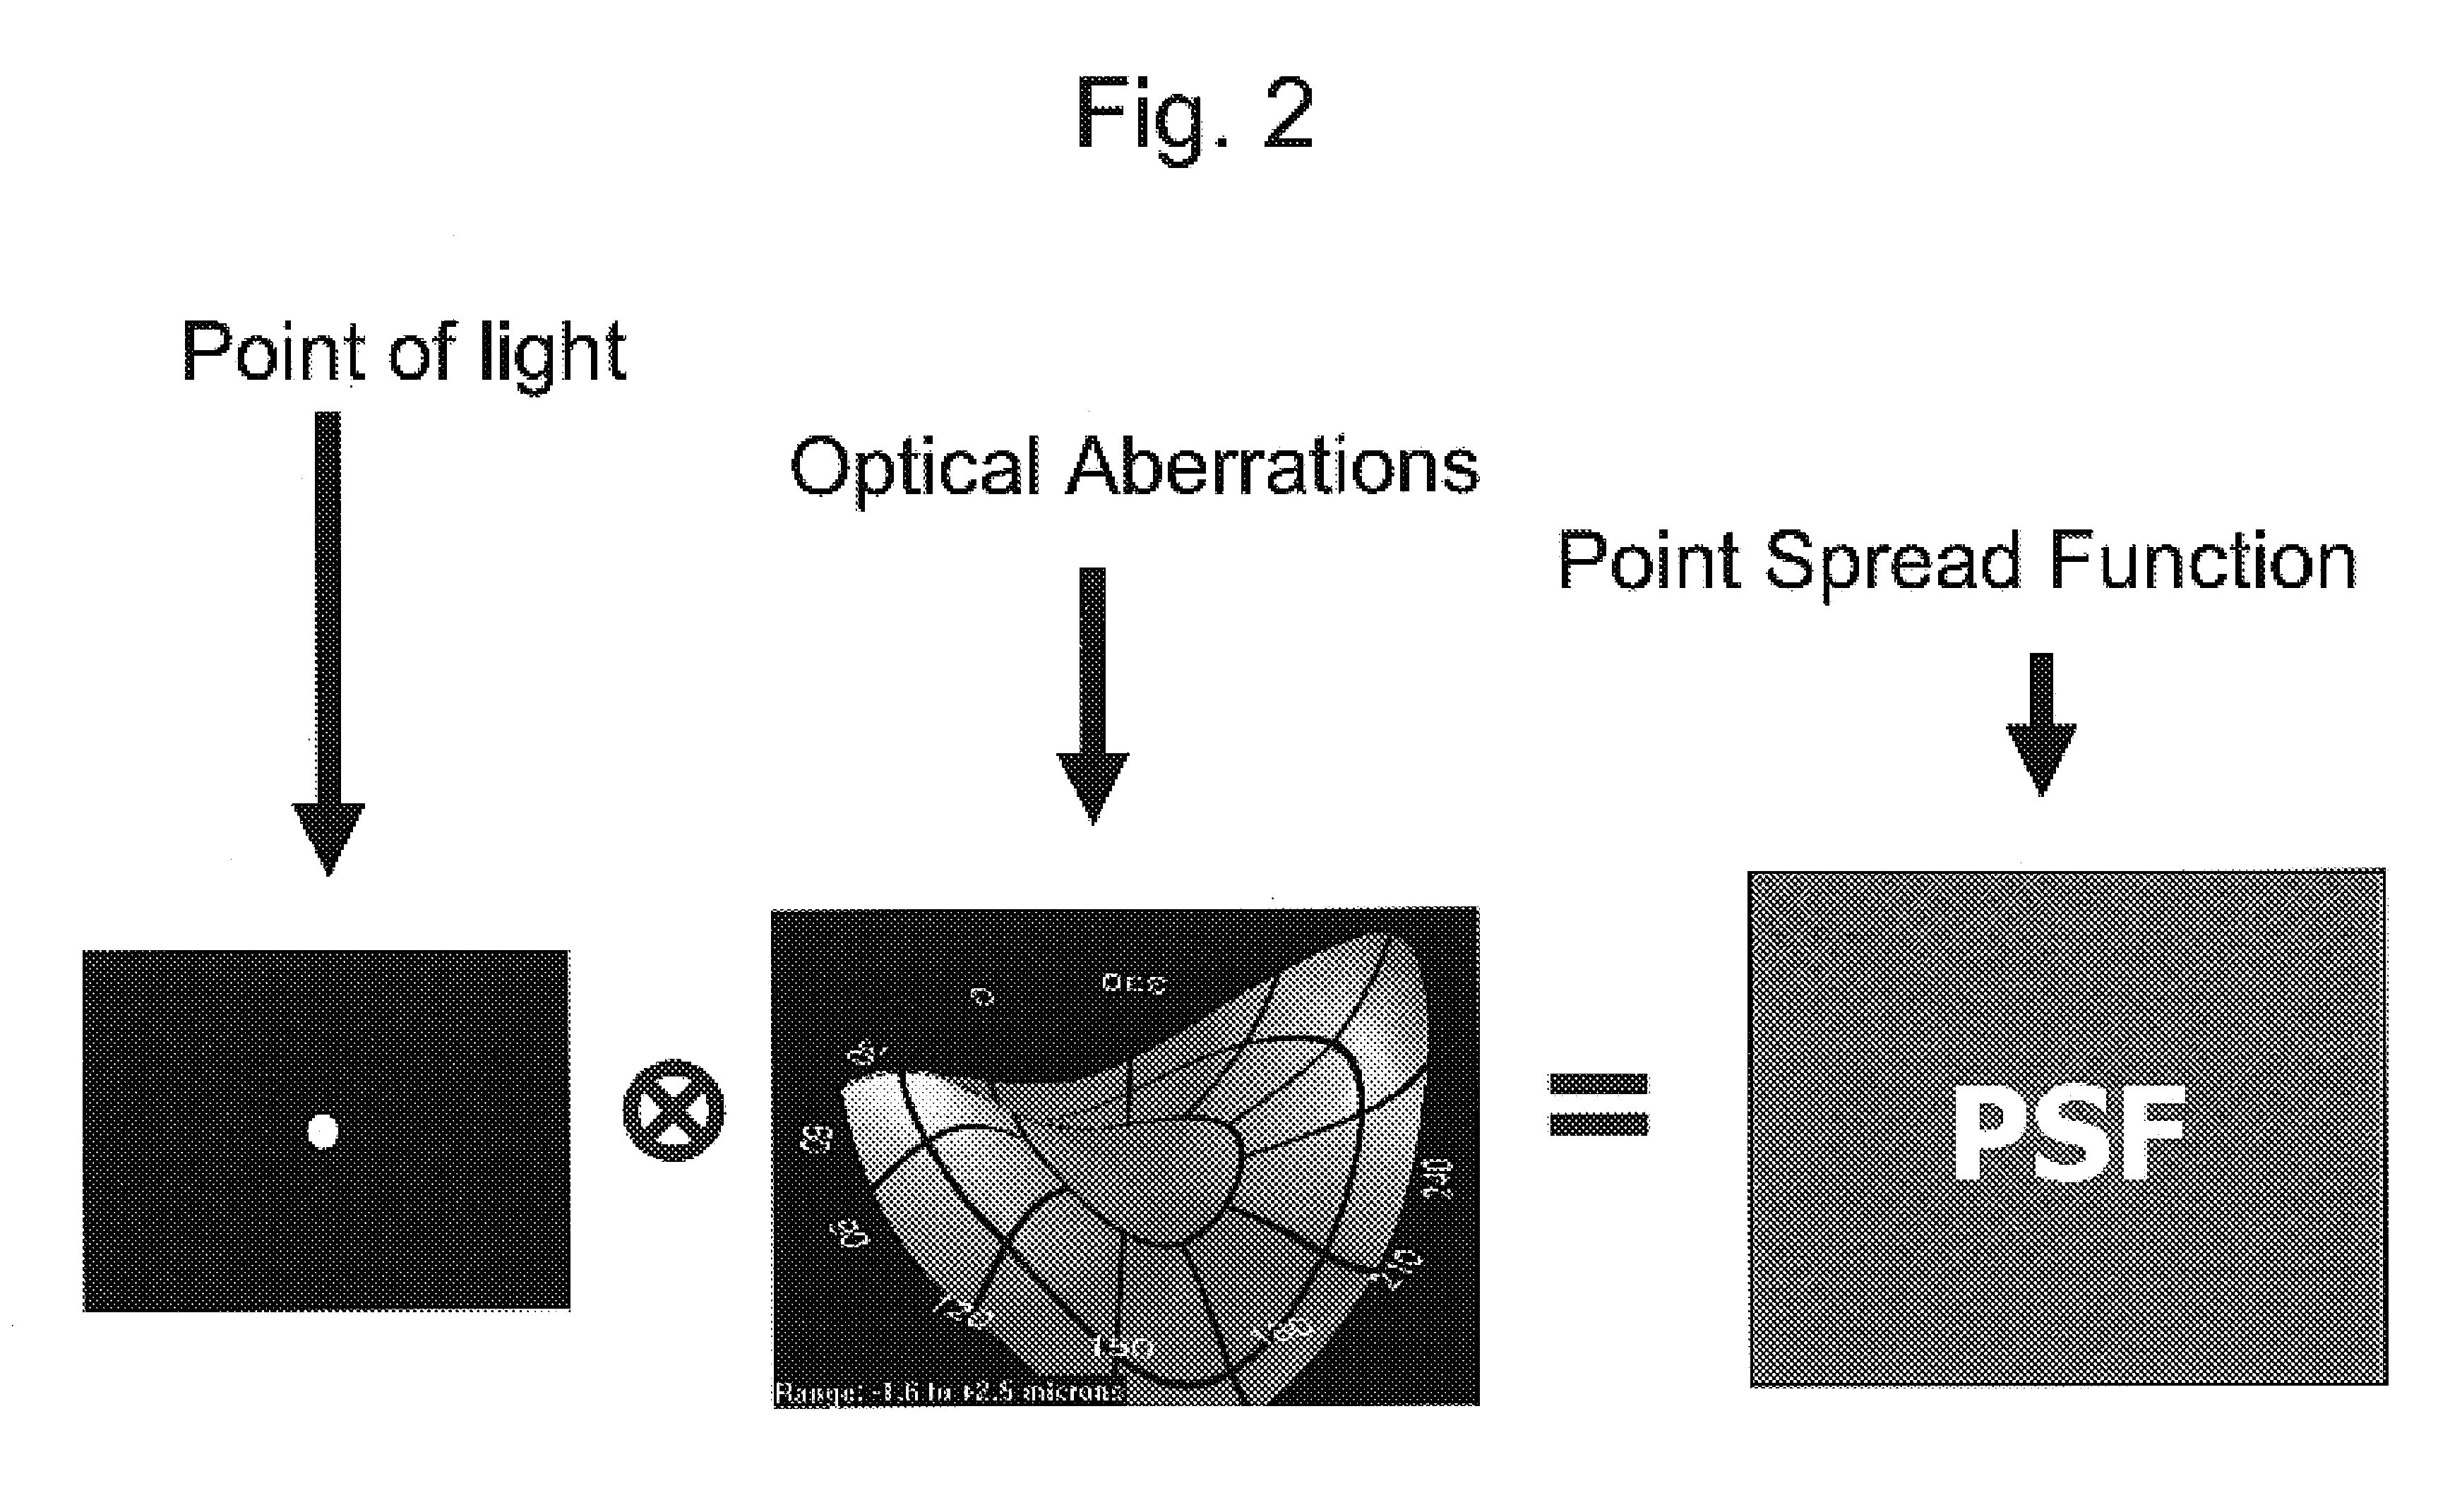 Volumetric point spread function for eye diagnosis and treatment